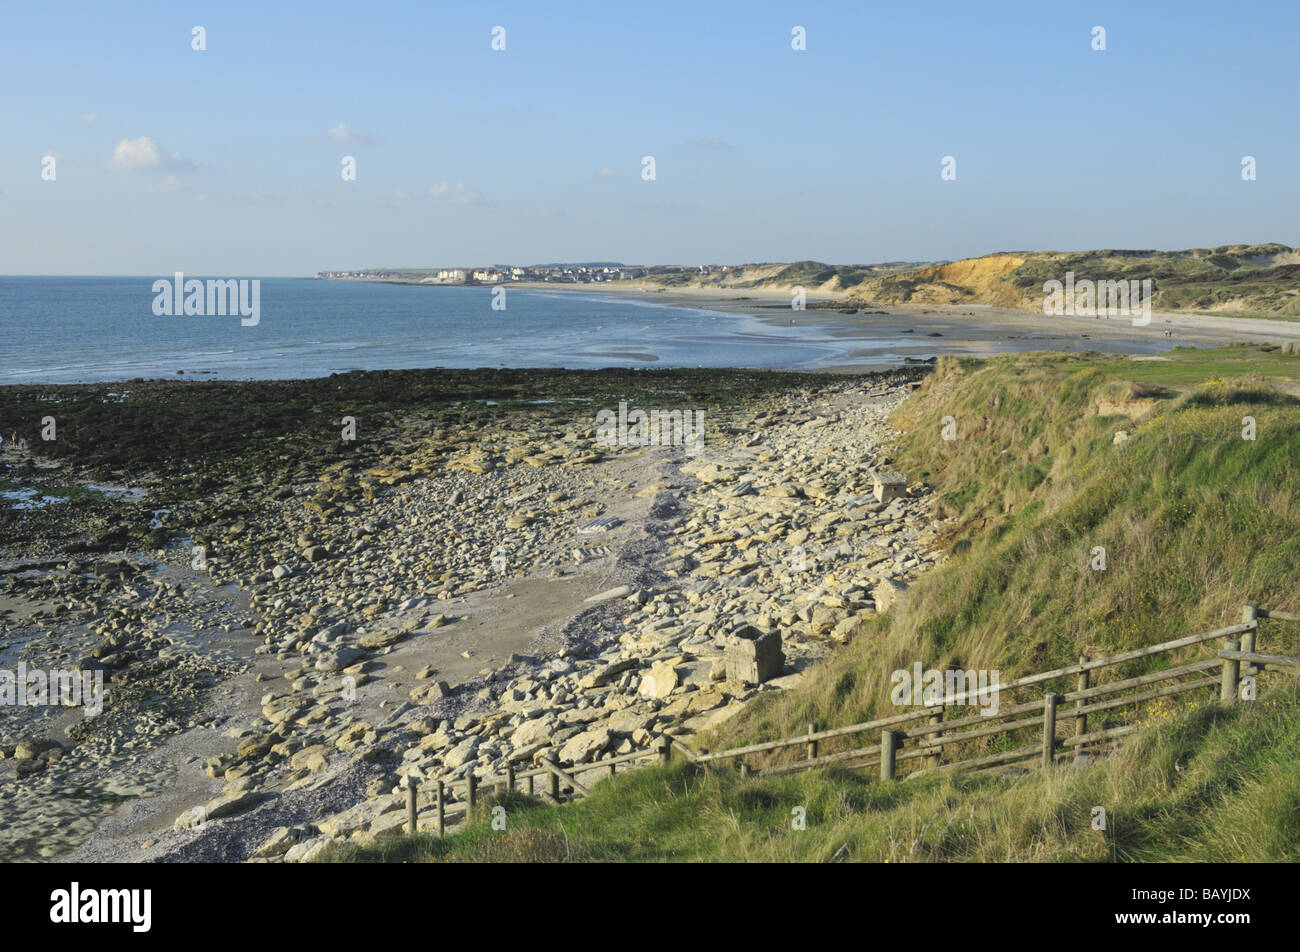 The coastline of Northern France near Pointe aux Oies with view of the English Channel Stock Photo